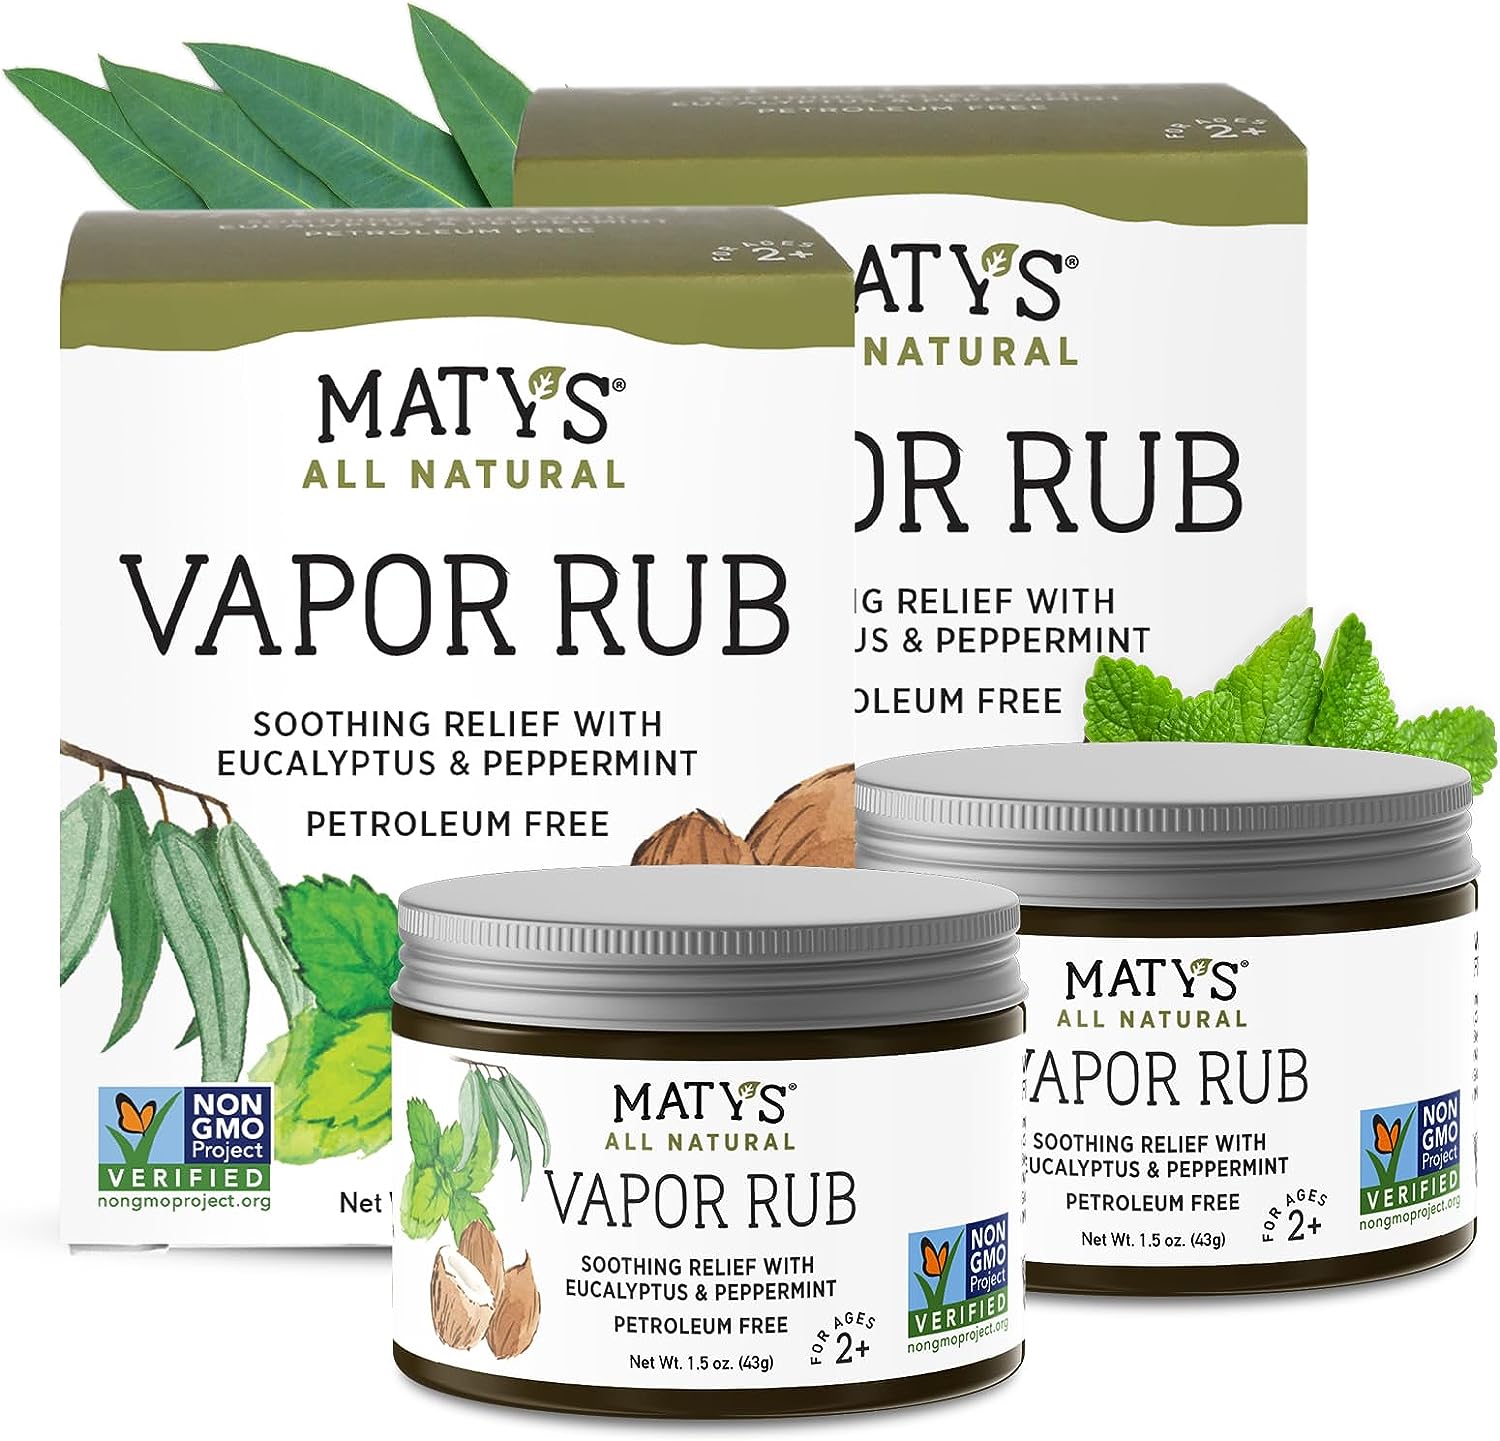 Matys Vapor Rub for Adults & Kids 2 Years +, Chest Rub to Relieve Cough, Congestion, & Stuffy Noses, Petroleum Free w/Eucalyptus, 2 Jars, 1.5oz Each